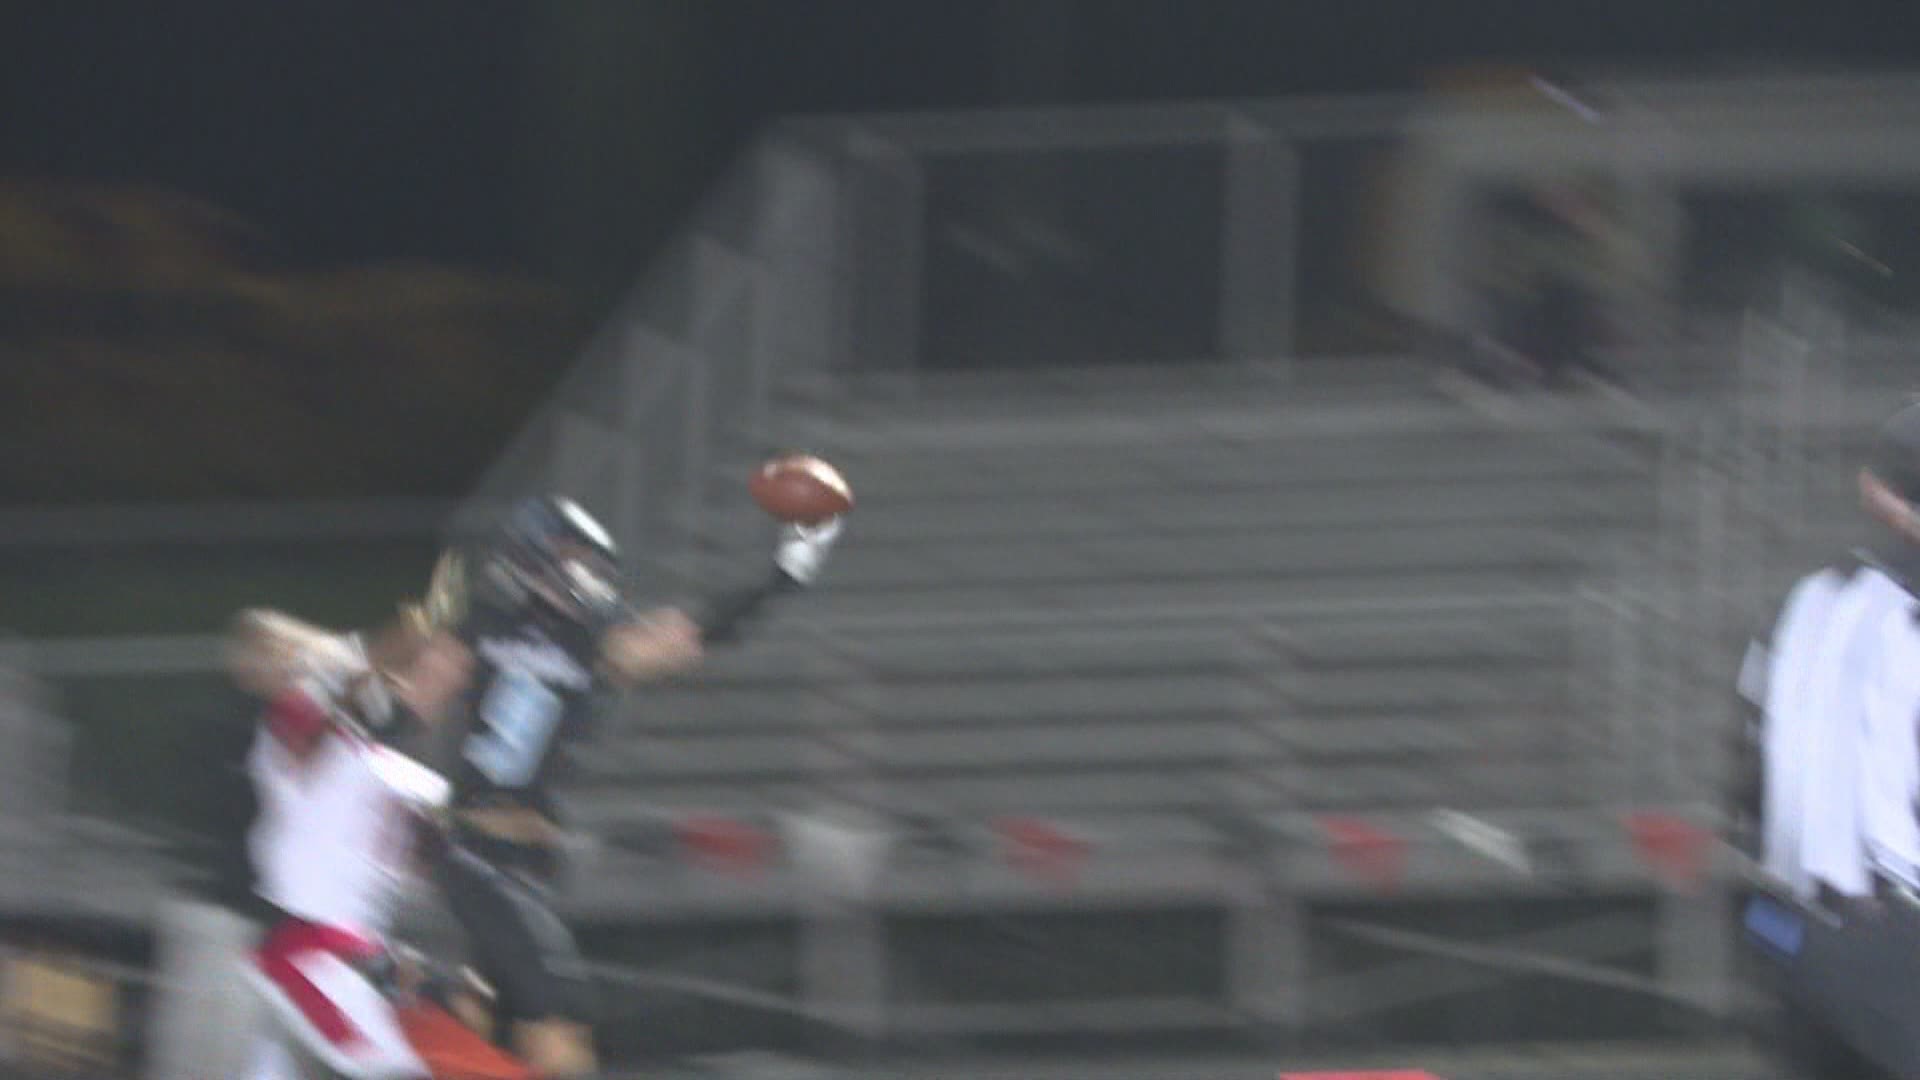 Highlights of Hockinson's 35-28 win over Steilacoom in the WIAA 2A state quarterfinals on Nov. 16, 2018.